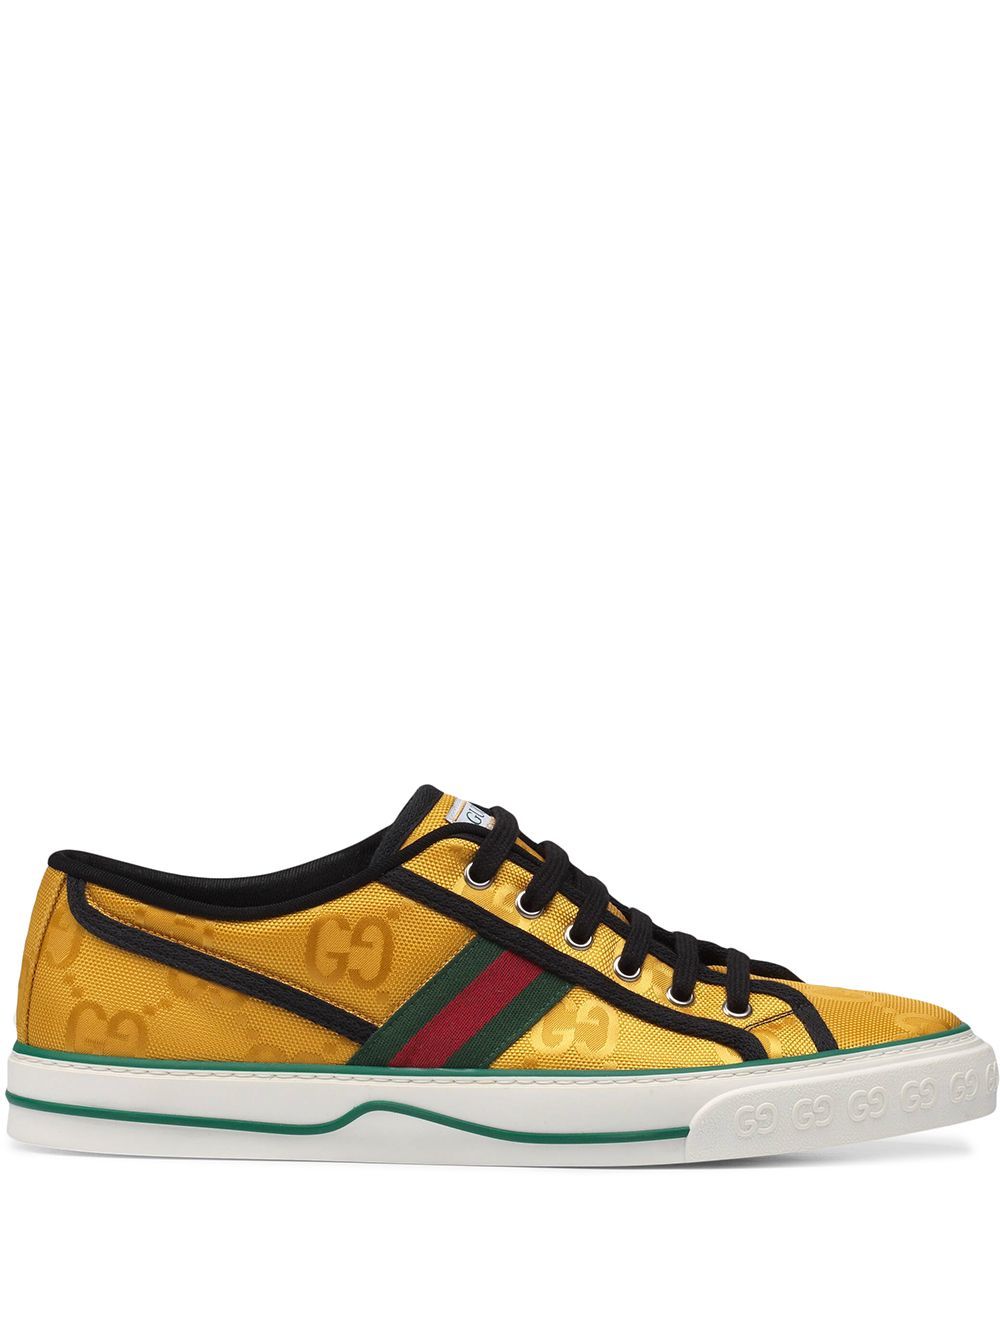 Sell Gucci Off The Grid Sneakers - Yellow | HuntStreet.com